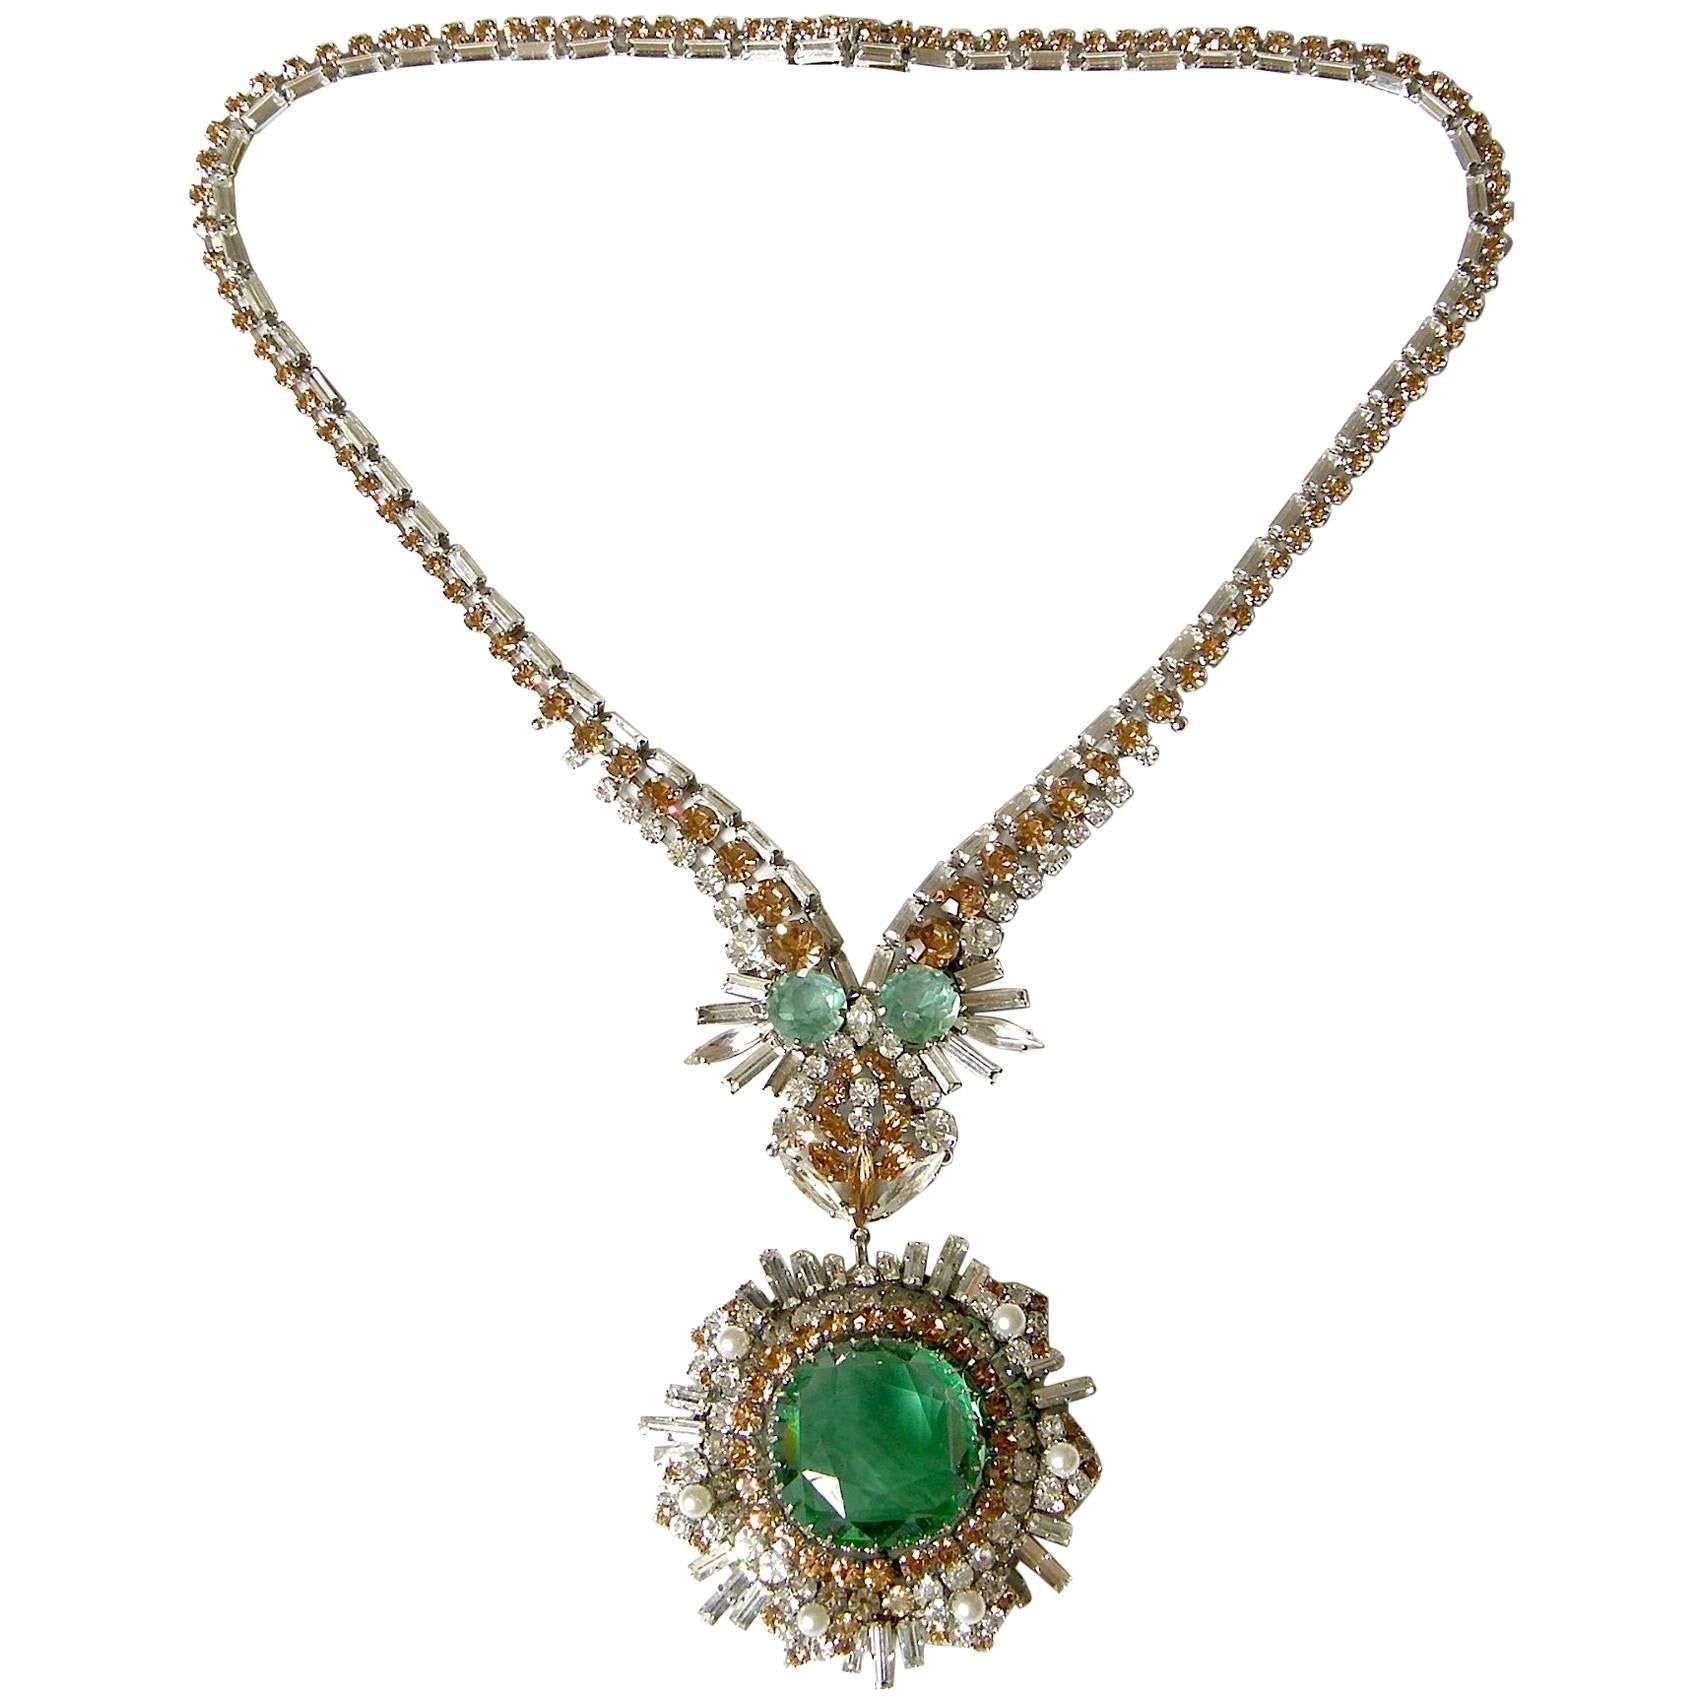 West German Rhinestone Necklace with Faux Emeralds Diamonds and Citrines